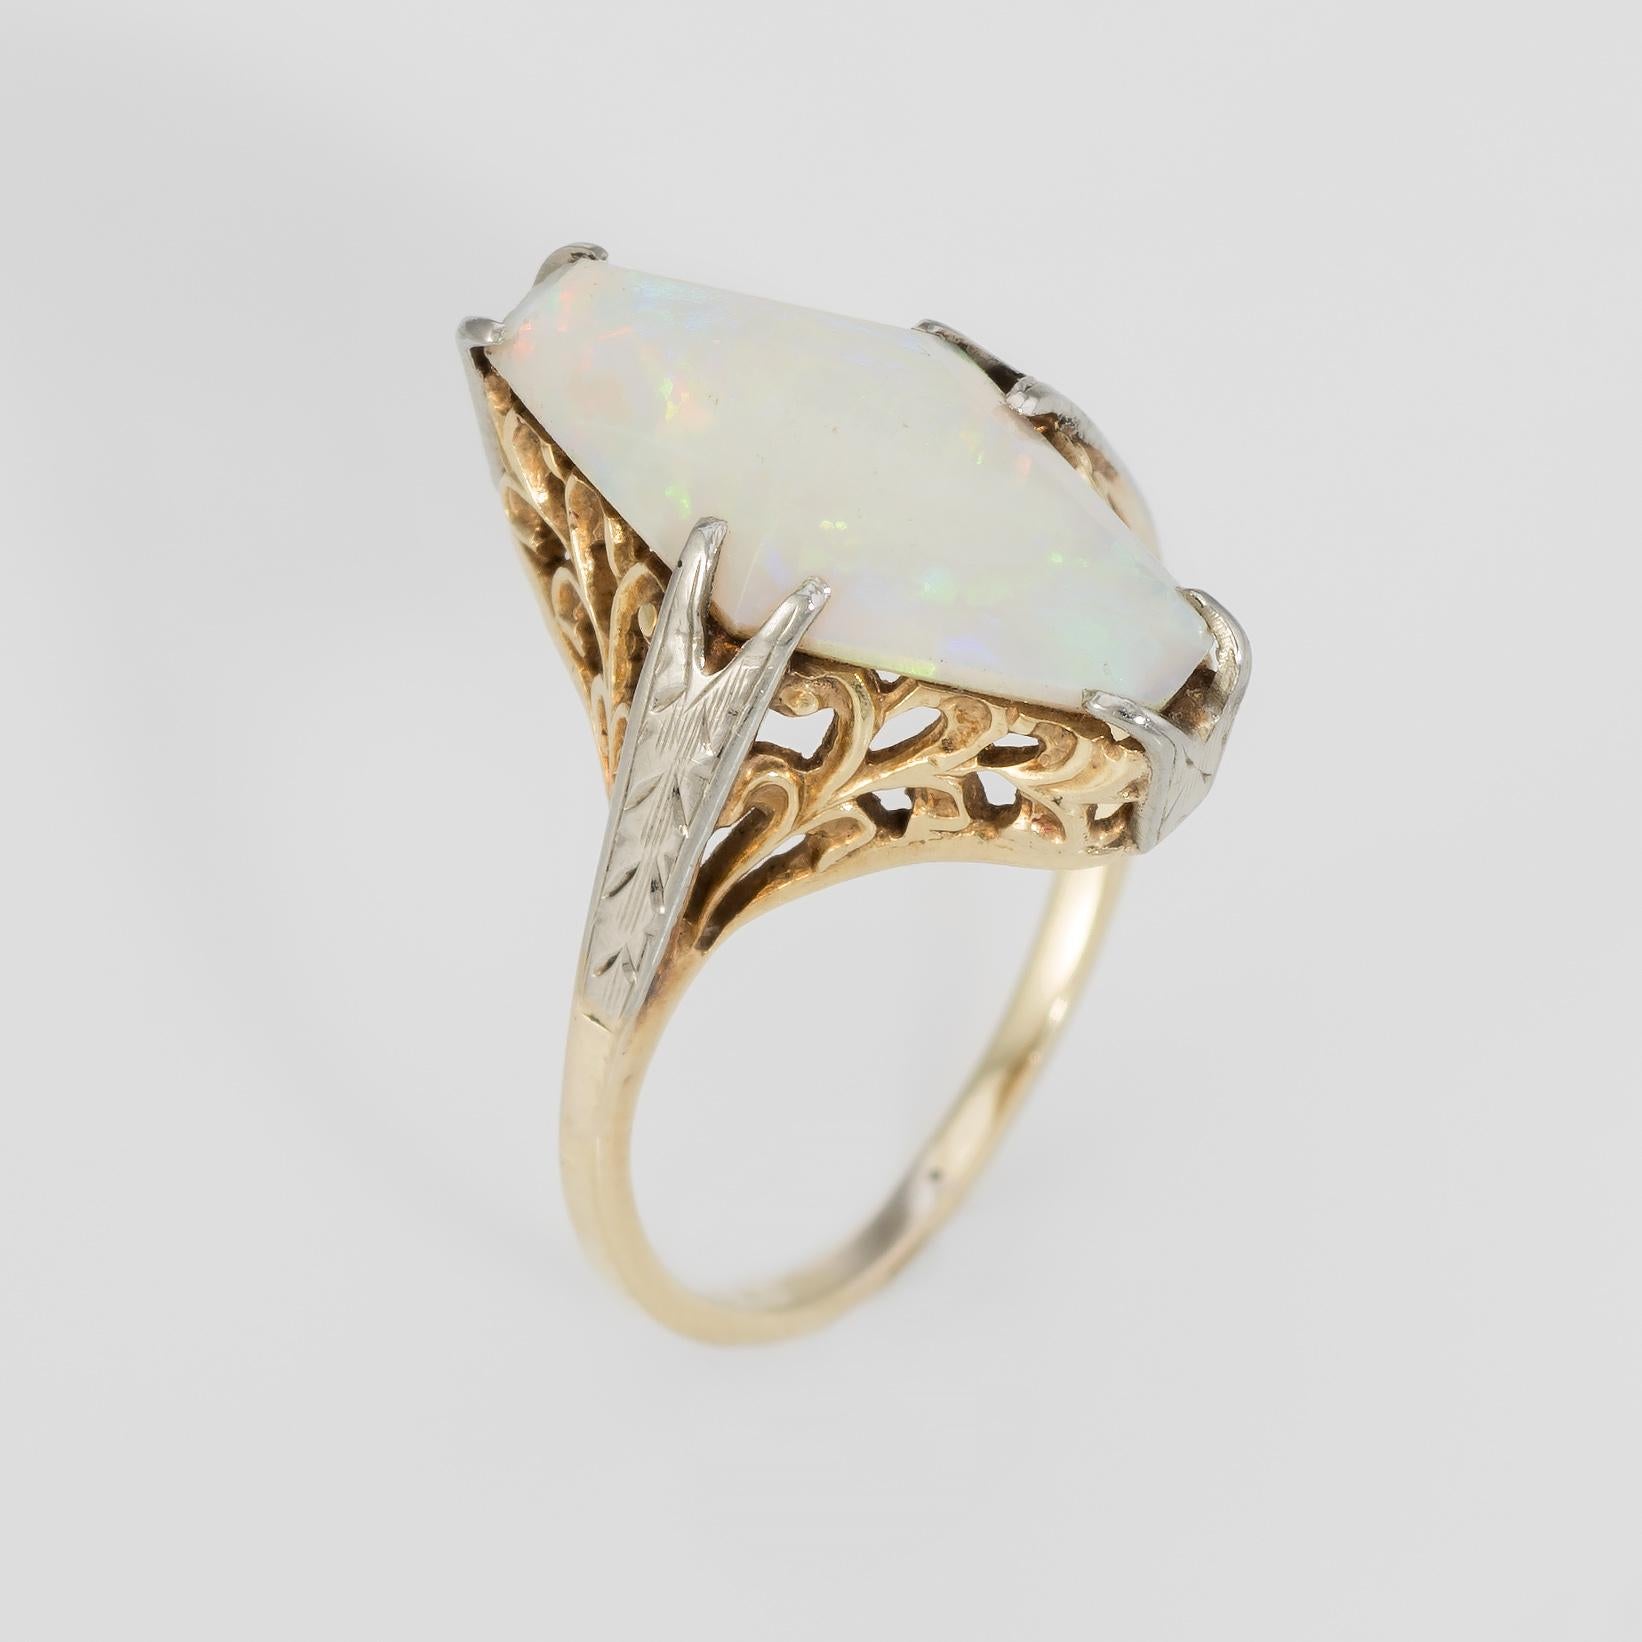 Finely detailed Art Deco era ring (circa 1920s to 1930s), crafted in two tone 14 karat yellow and white gold. 

Triangular cut cabochon opal measures 16mm x 8mm (estimated at 4 carats). The opal displays a vivid color matrix from green to orange,